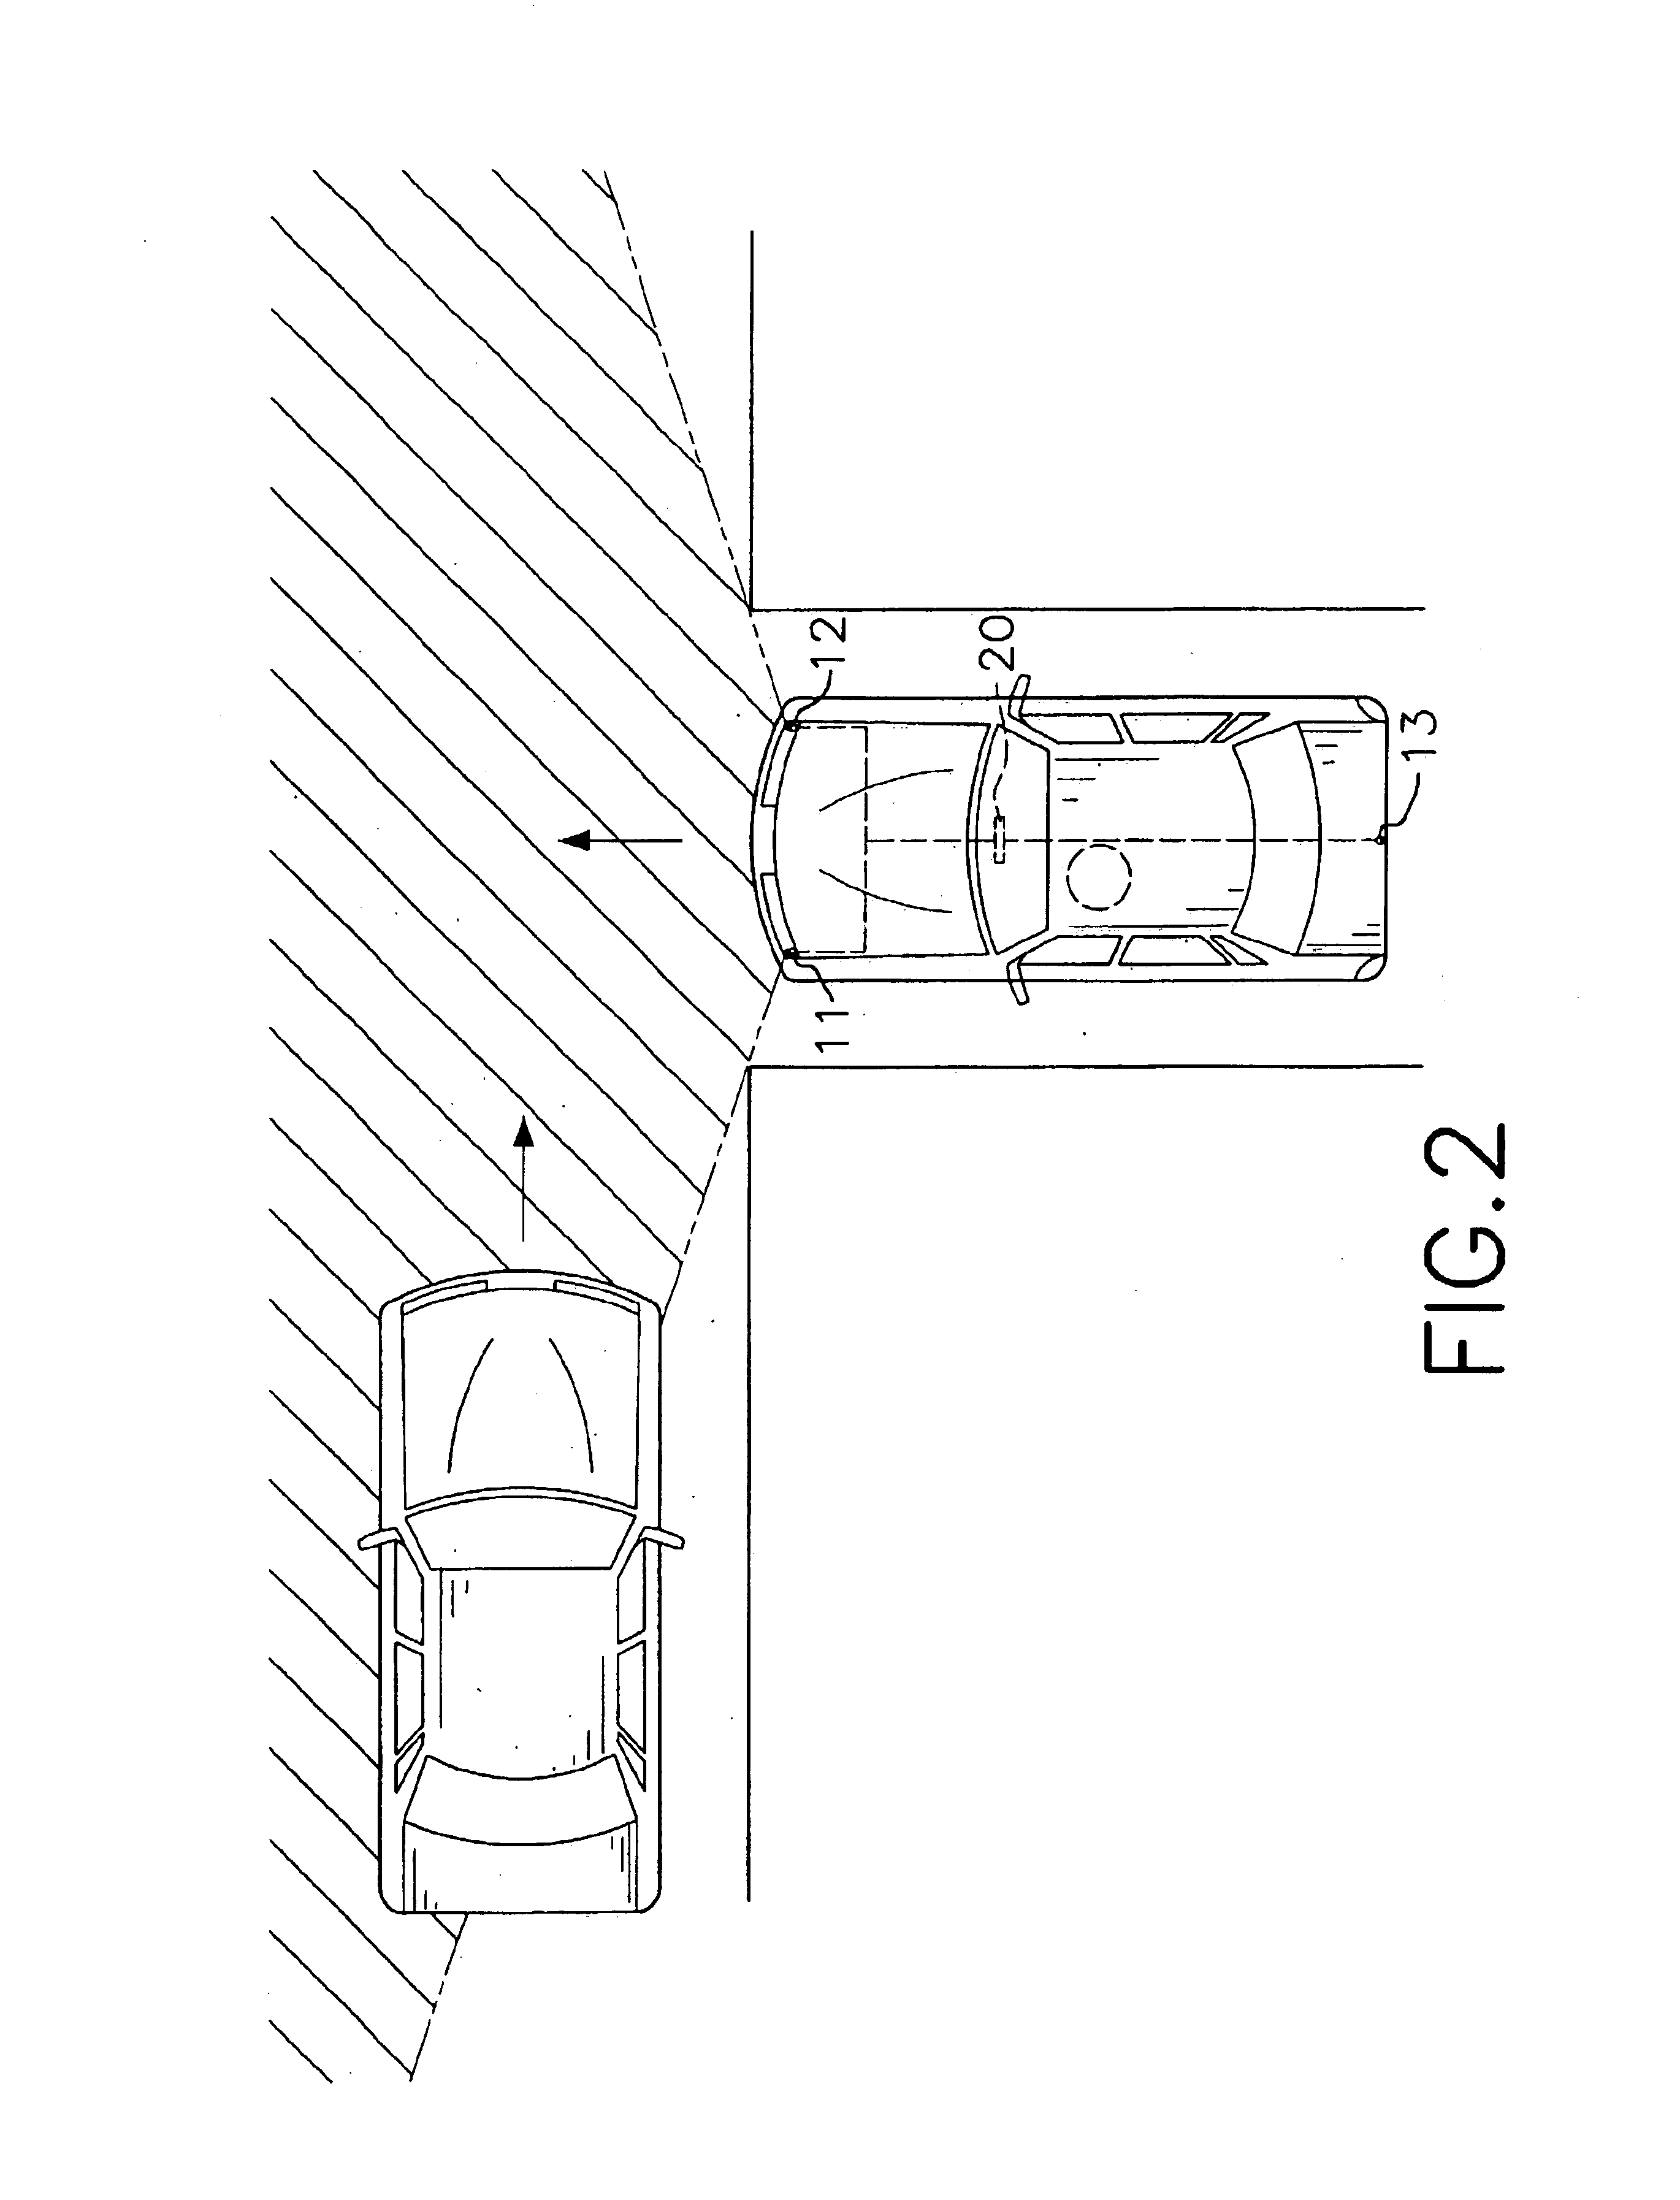 Driver information feedback and display system